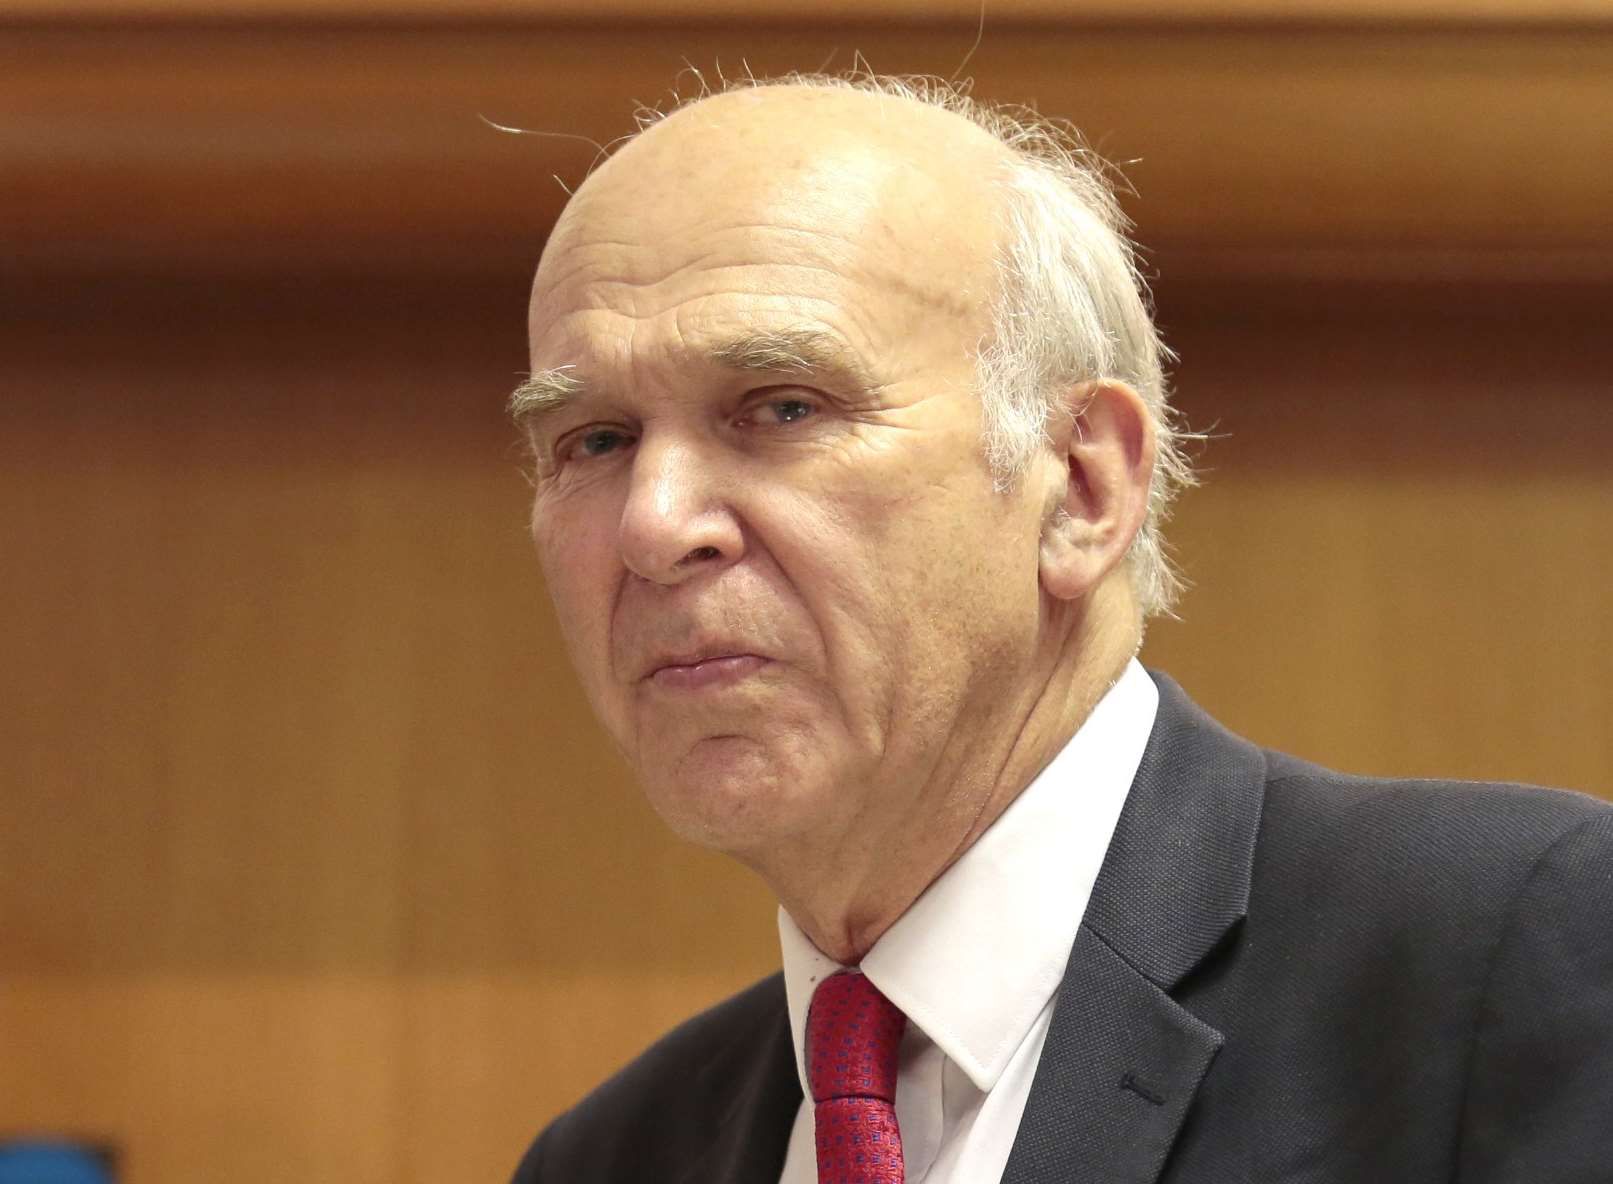 Lib Dem leader Vince Cable say the crisis is worsening